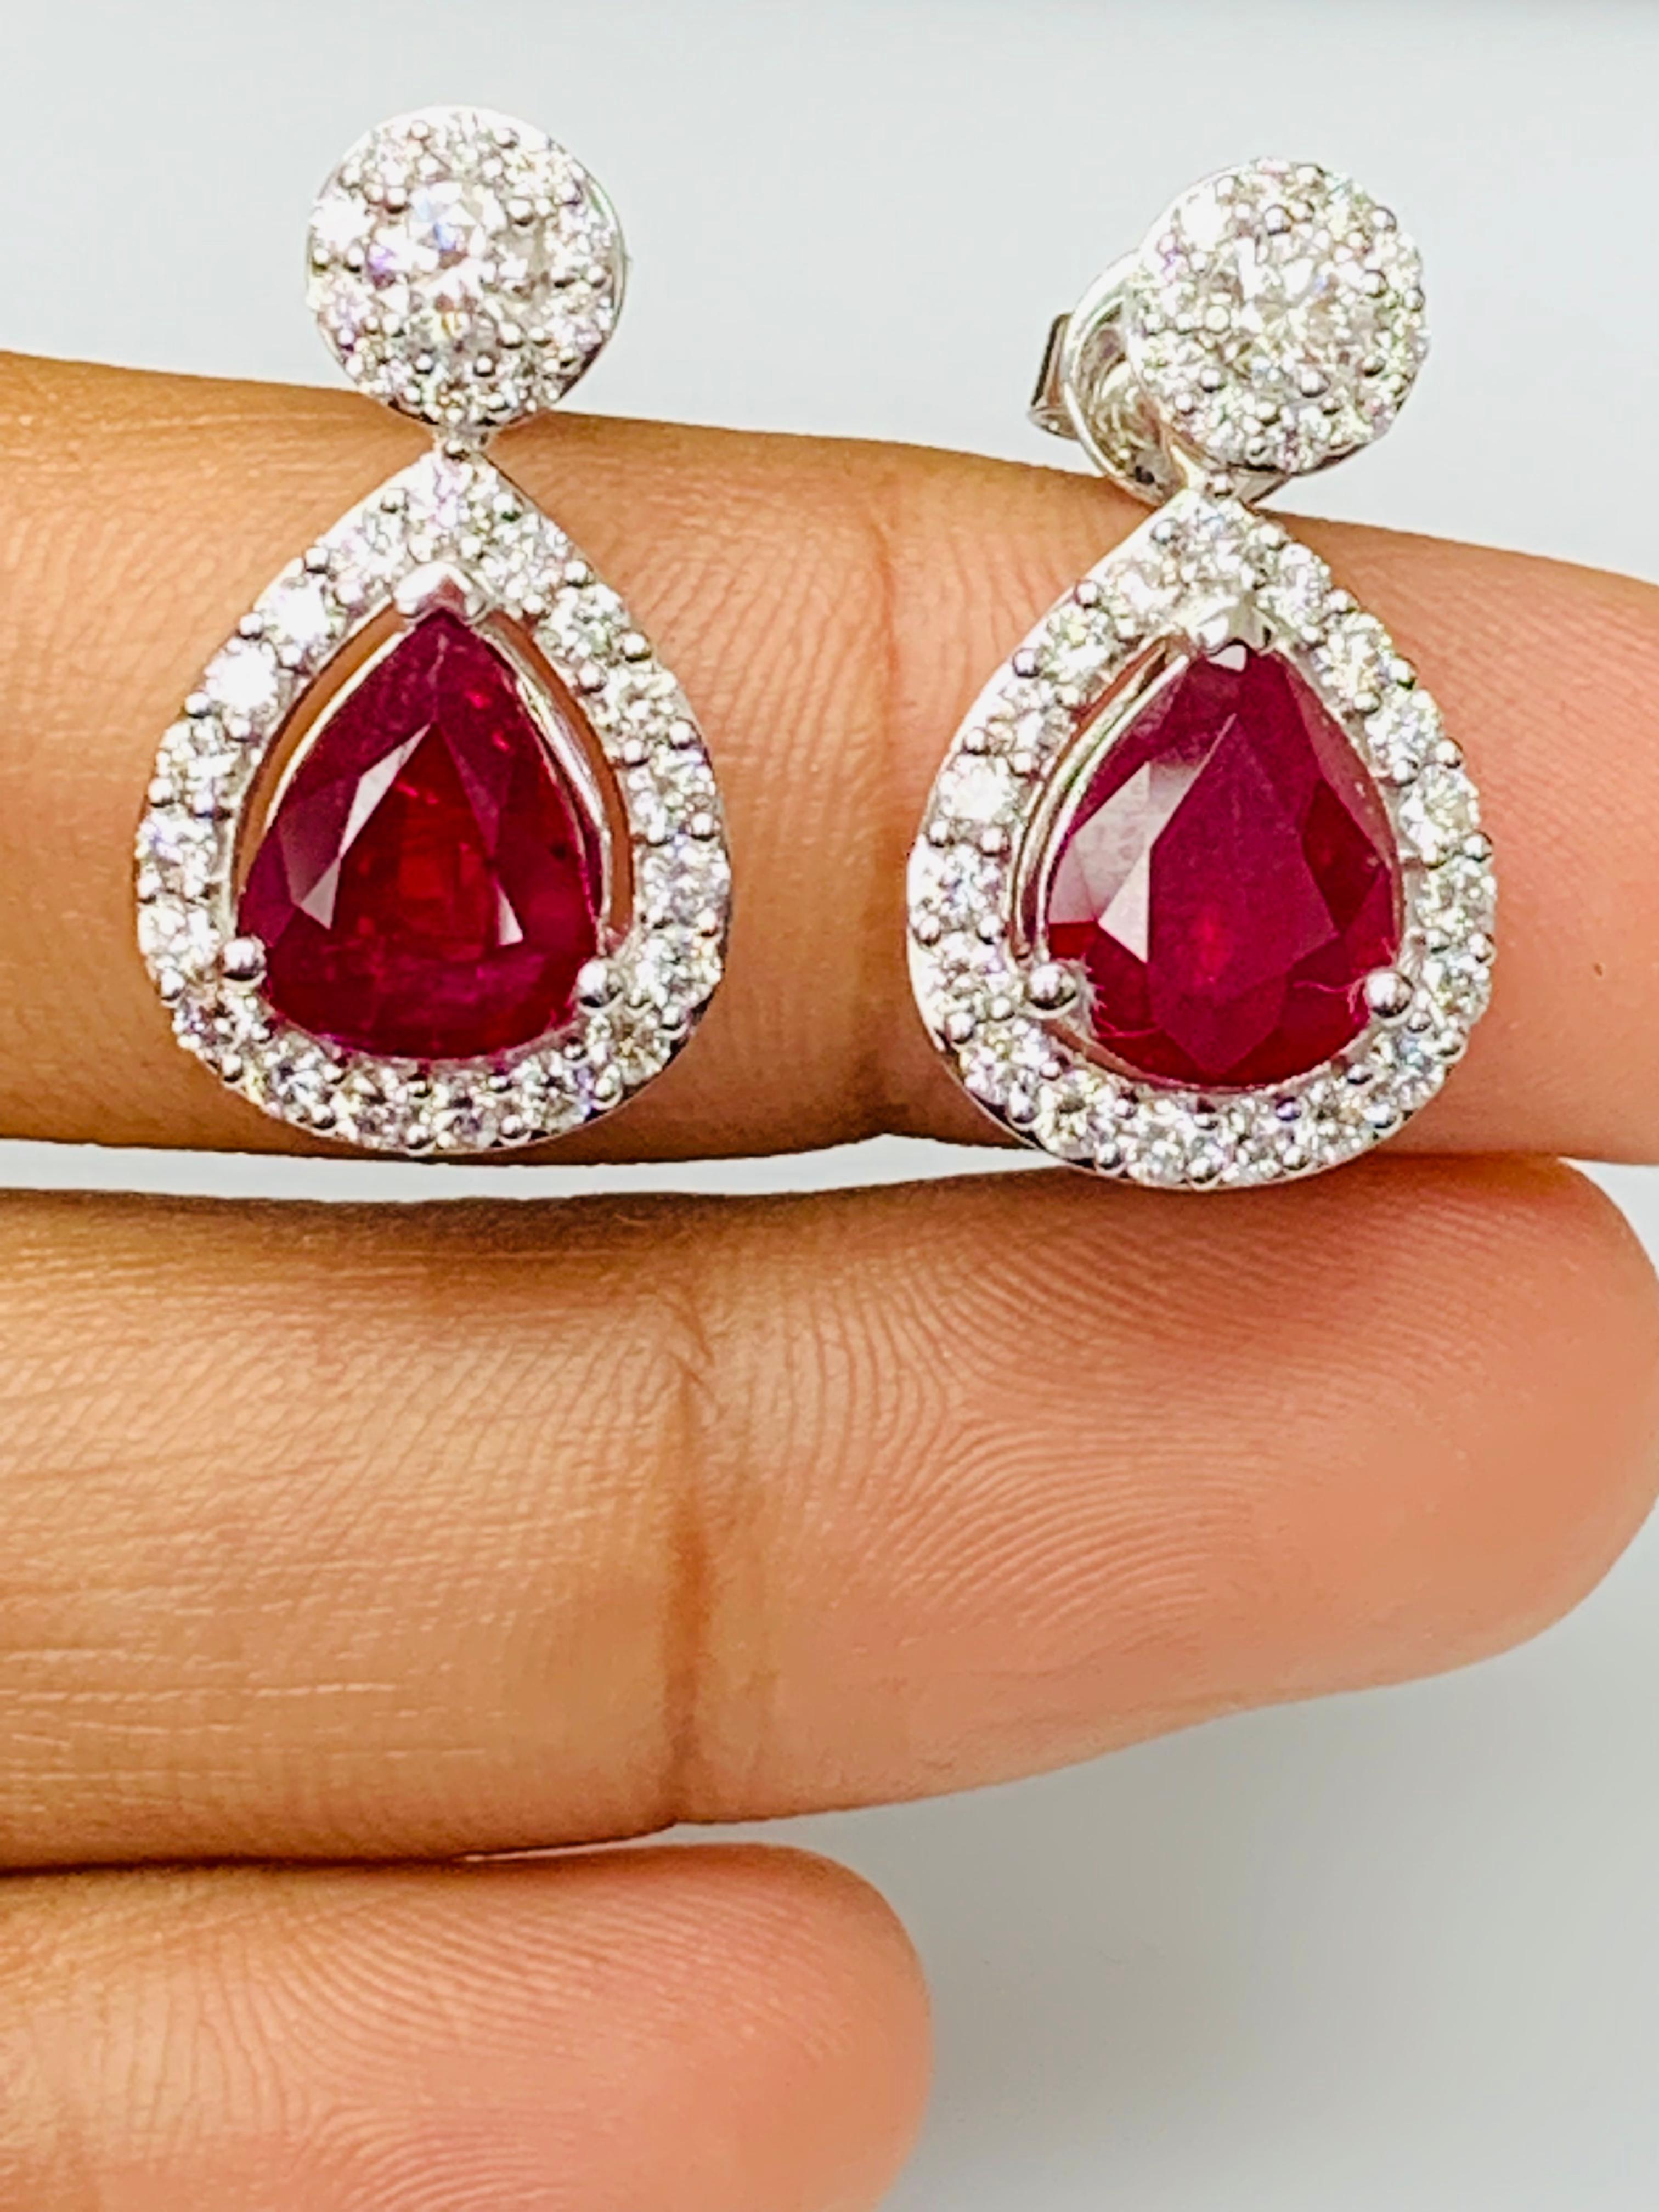 Contemporary 3.56 Carat of Pear Shape Ruby Diamond Drop Earrings in 18K White Gold For Sale